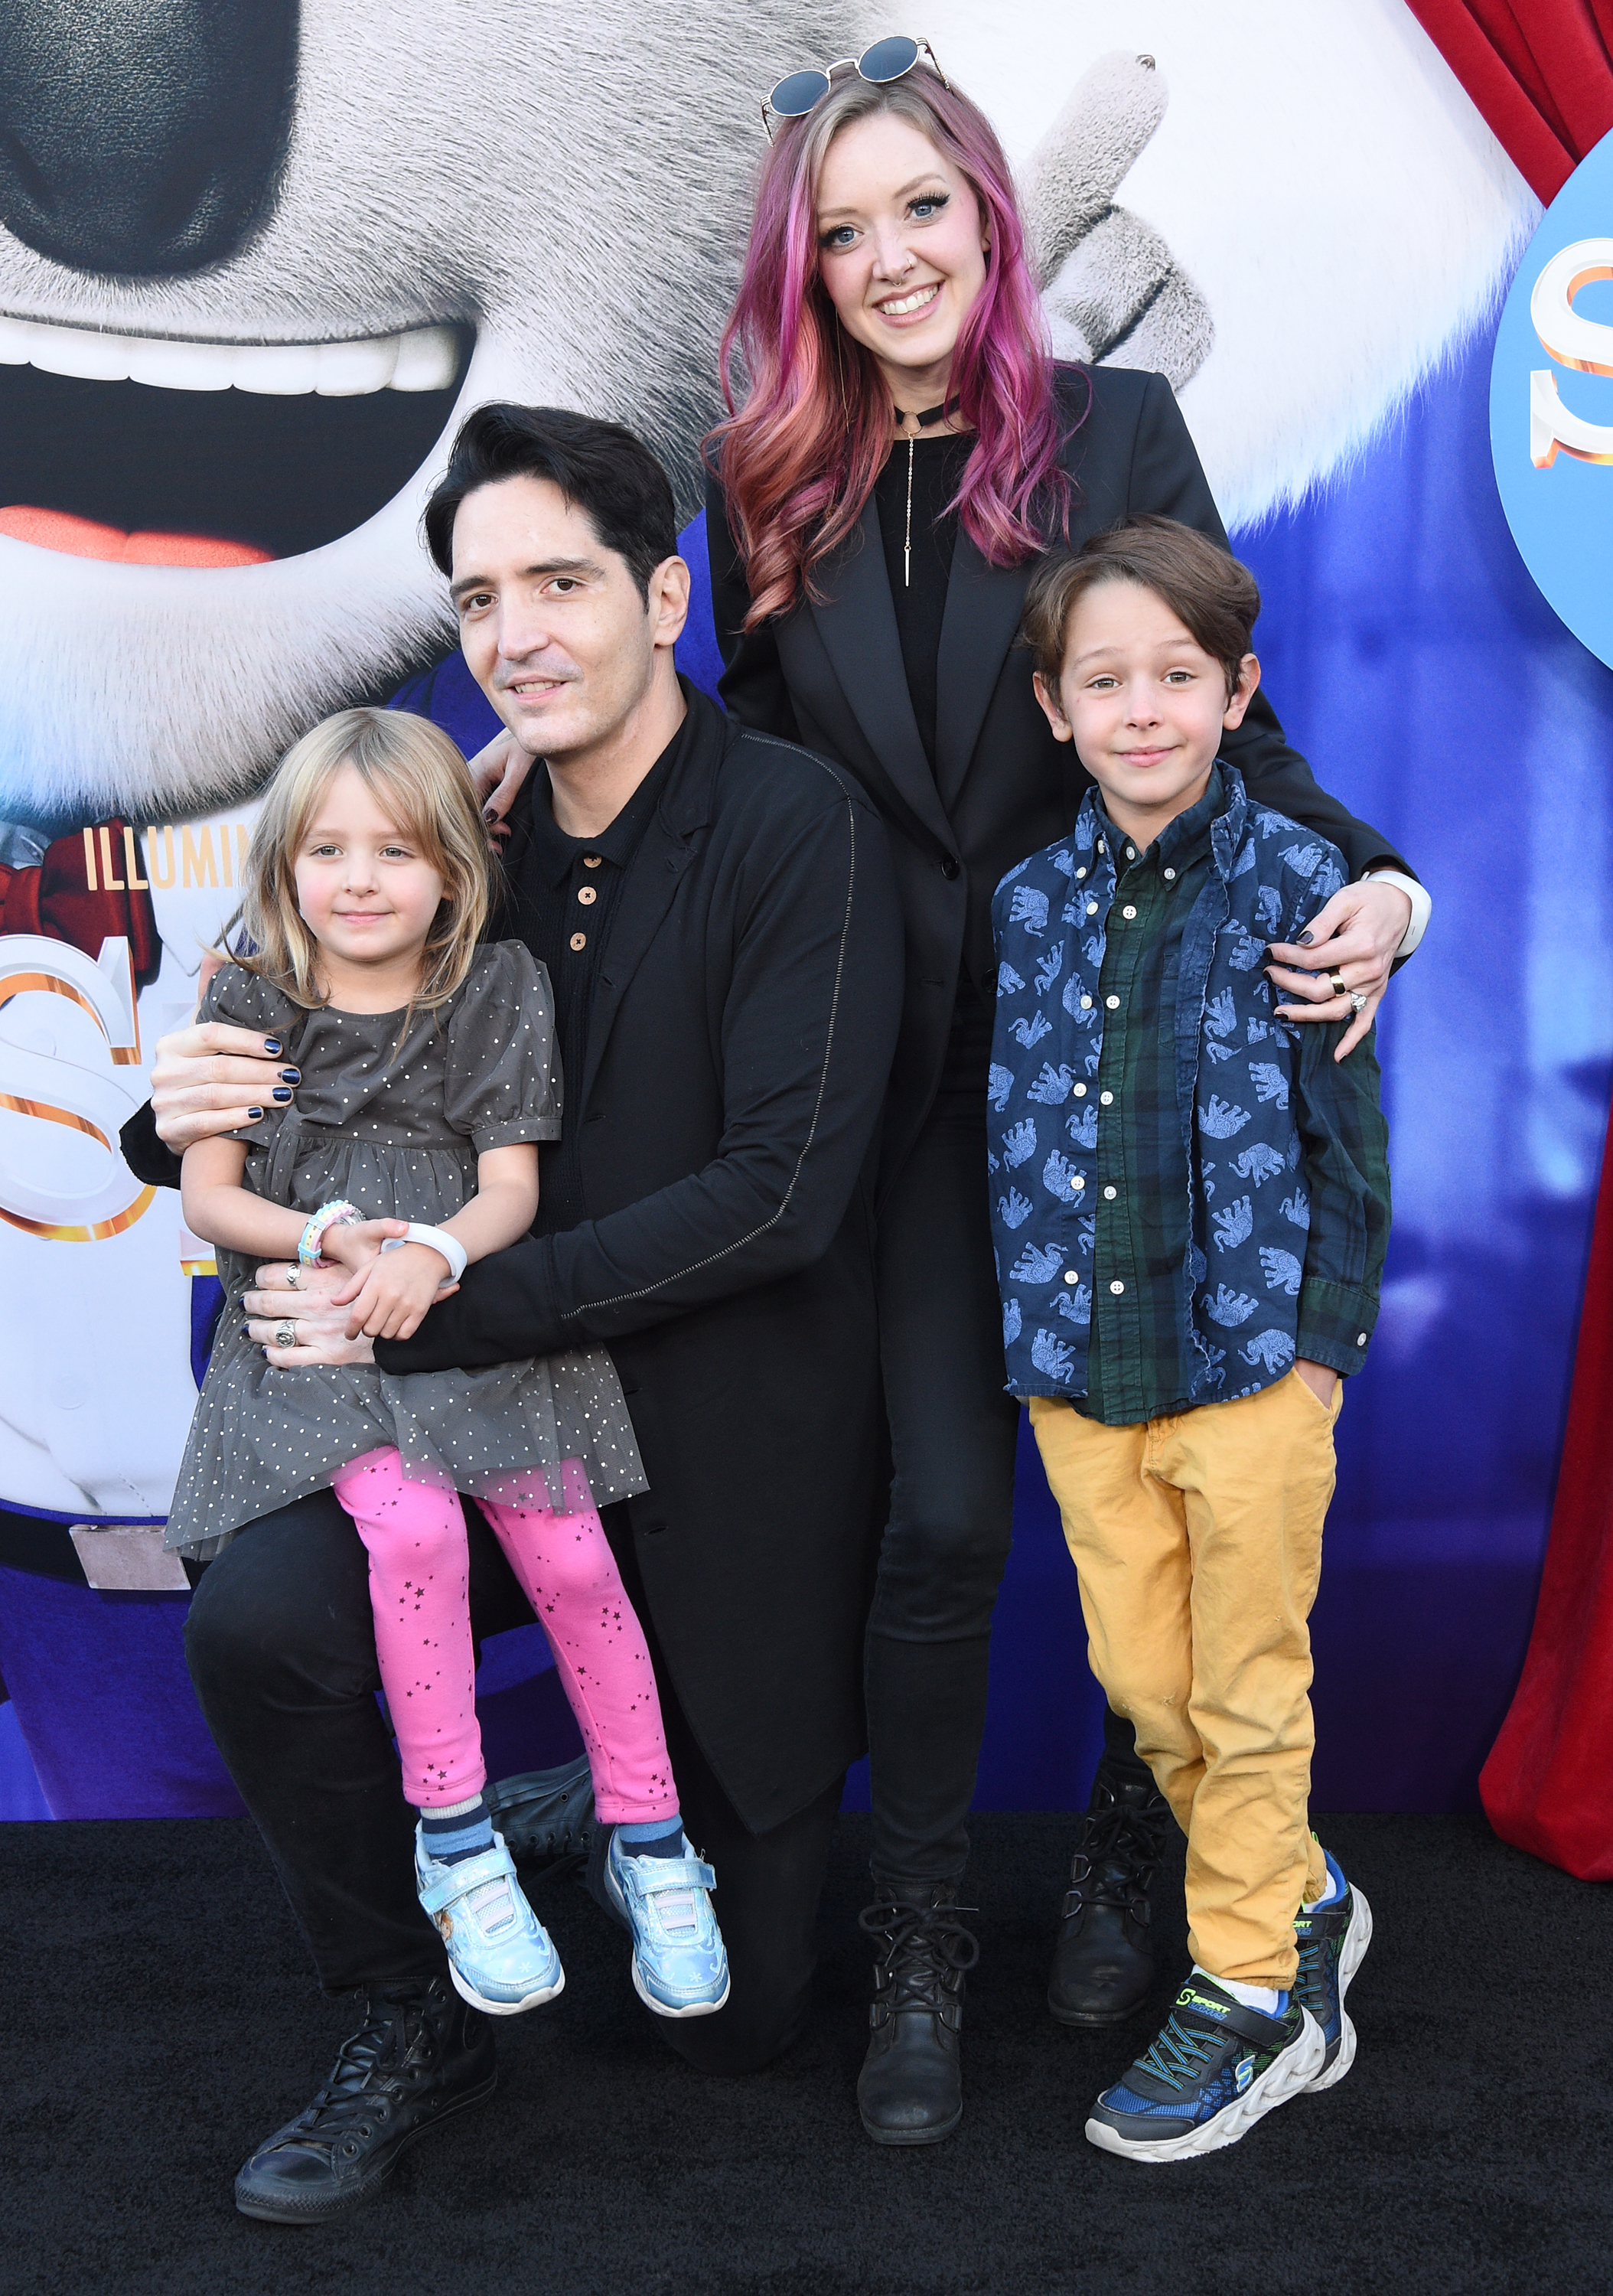 David Dastmalchian pictured with his wife Evelyn Leigh, and children Pennie and Arlo at the premiere of "Sing 2" on December 12, 2021 in Los Angeles, California | Source: Getty Images